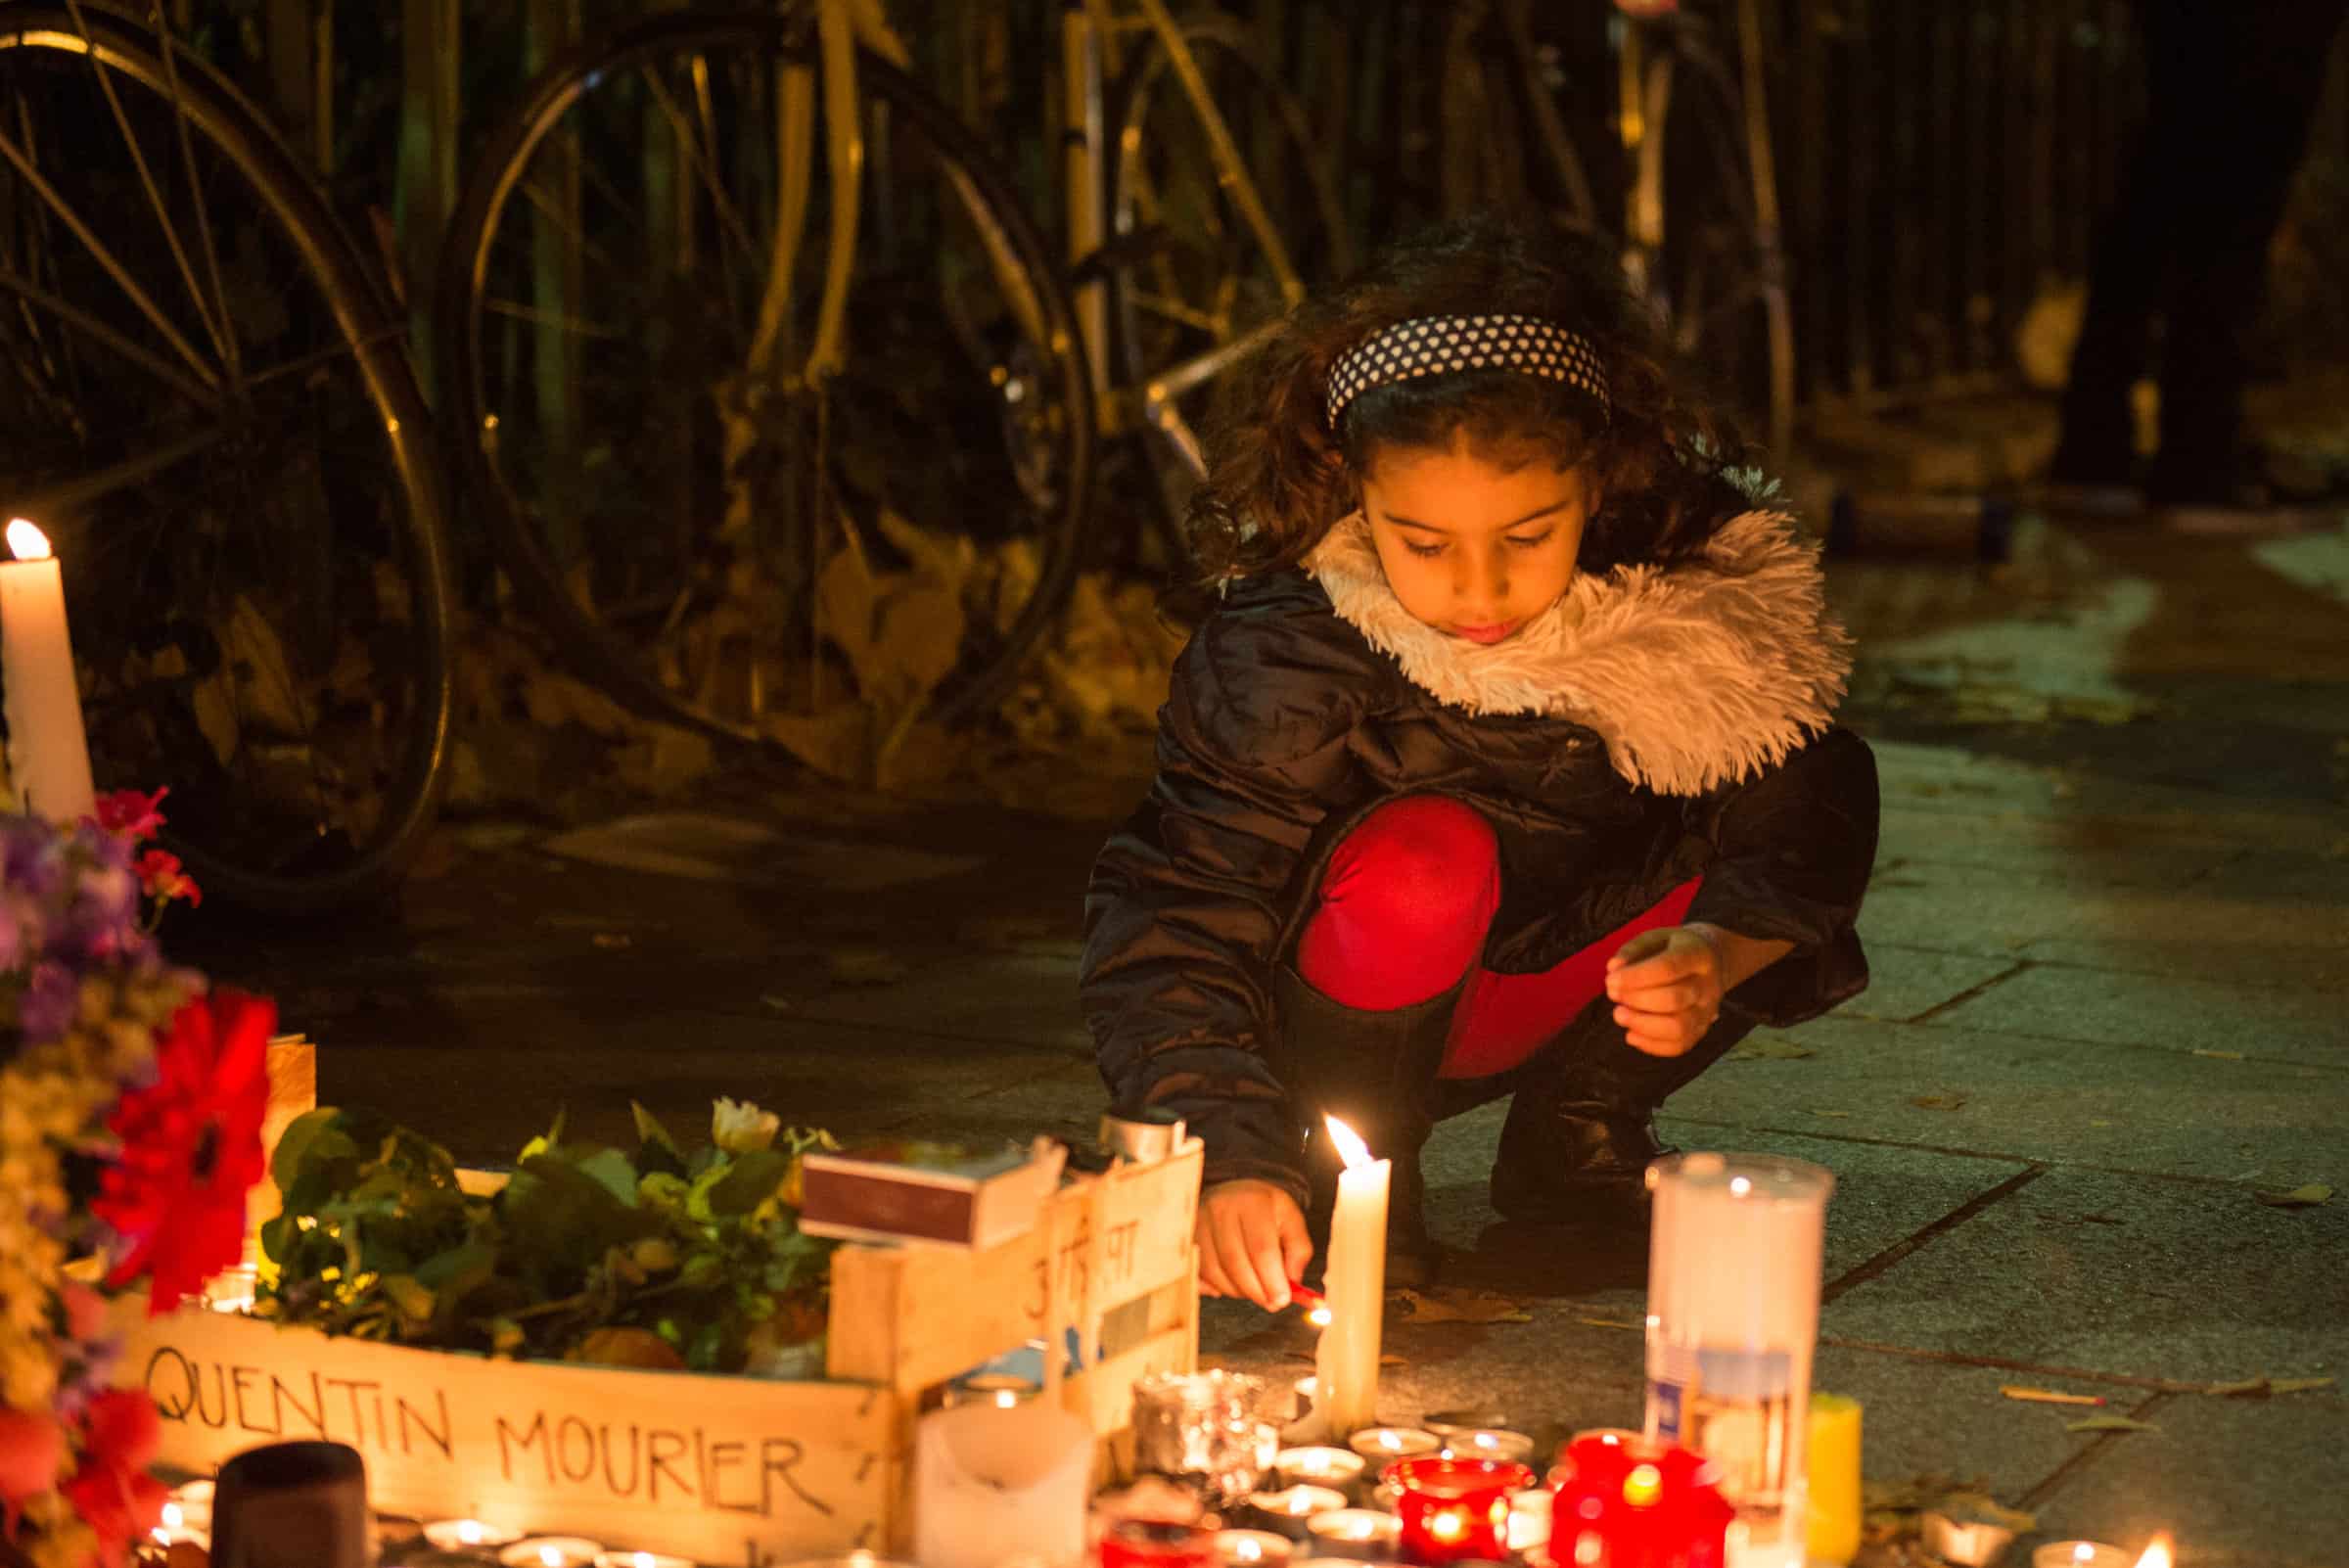 Je Suis Paris: Images of Solidarity and Hope in the Face of Tragedy